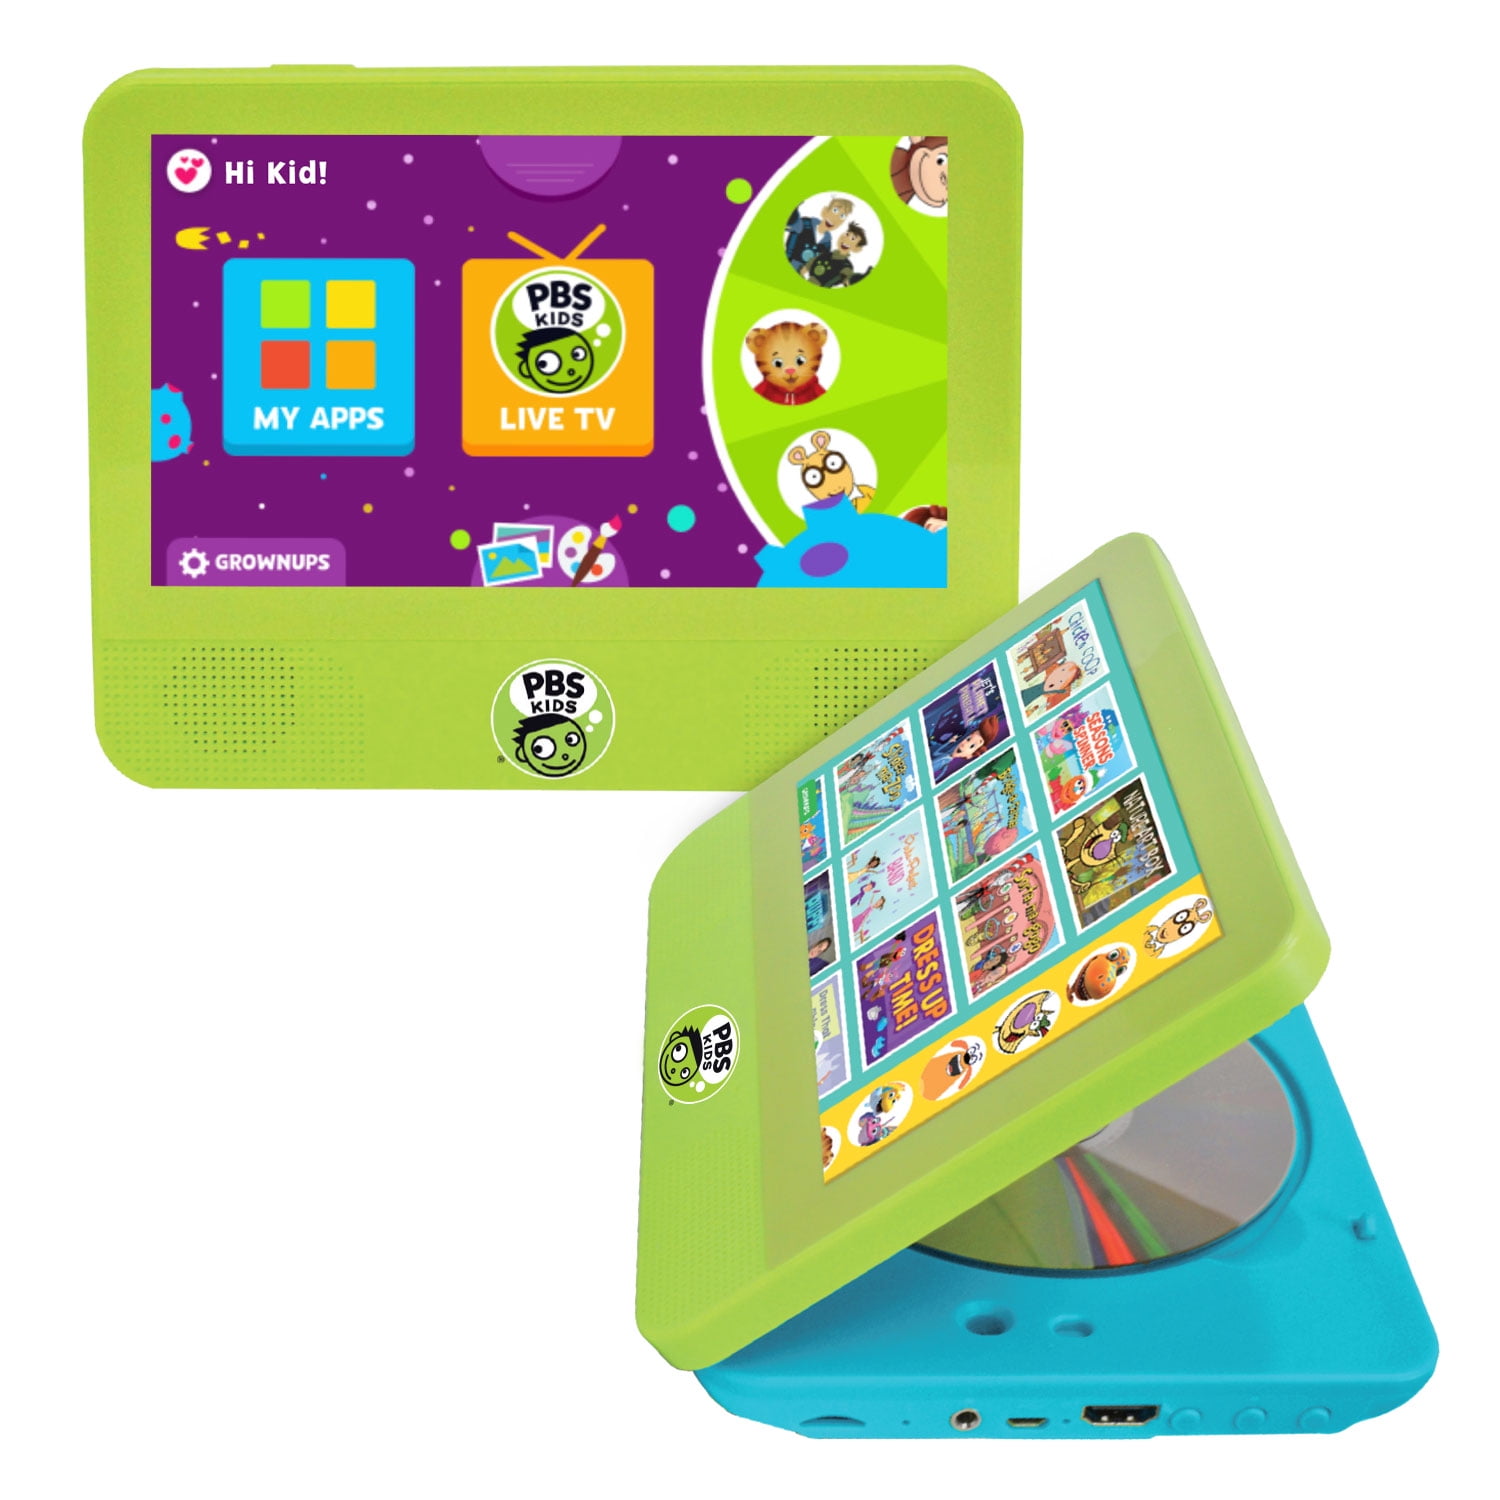 PBS Playtime Pad 7" Kid Safe Educational Tablet and DVD Player All-in-One | Video Clips, Songs, Educational Games, Music Videos and More!